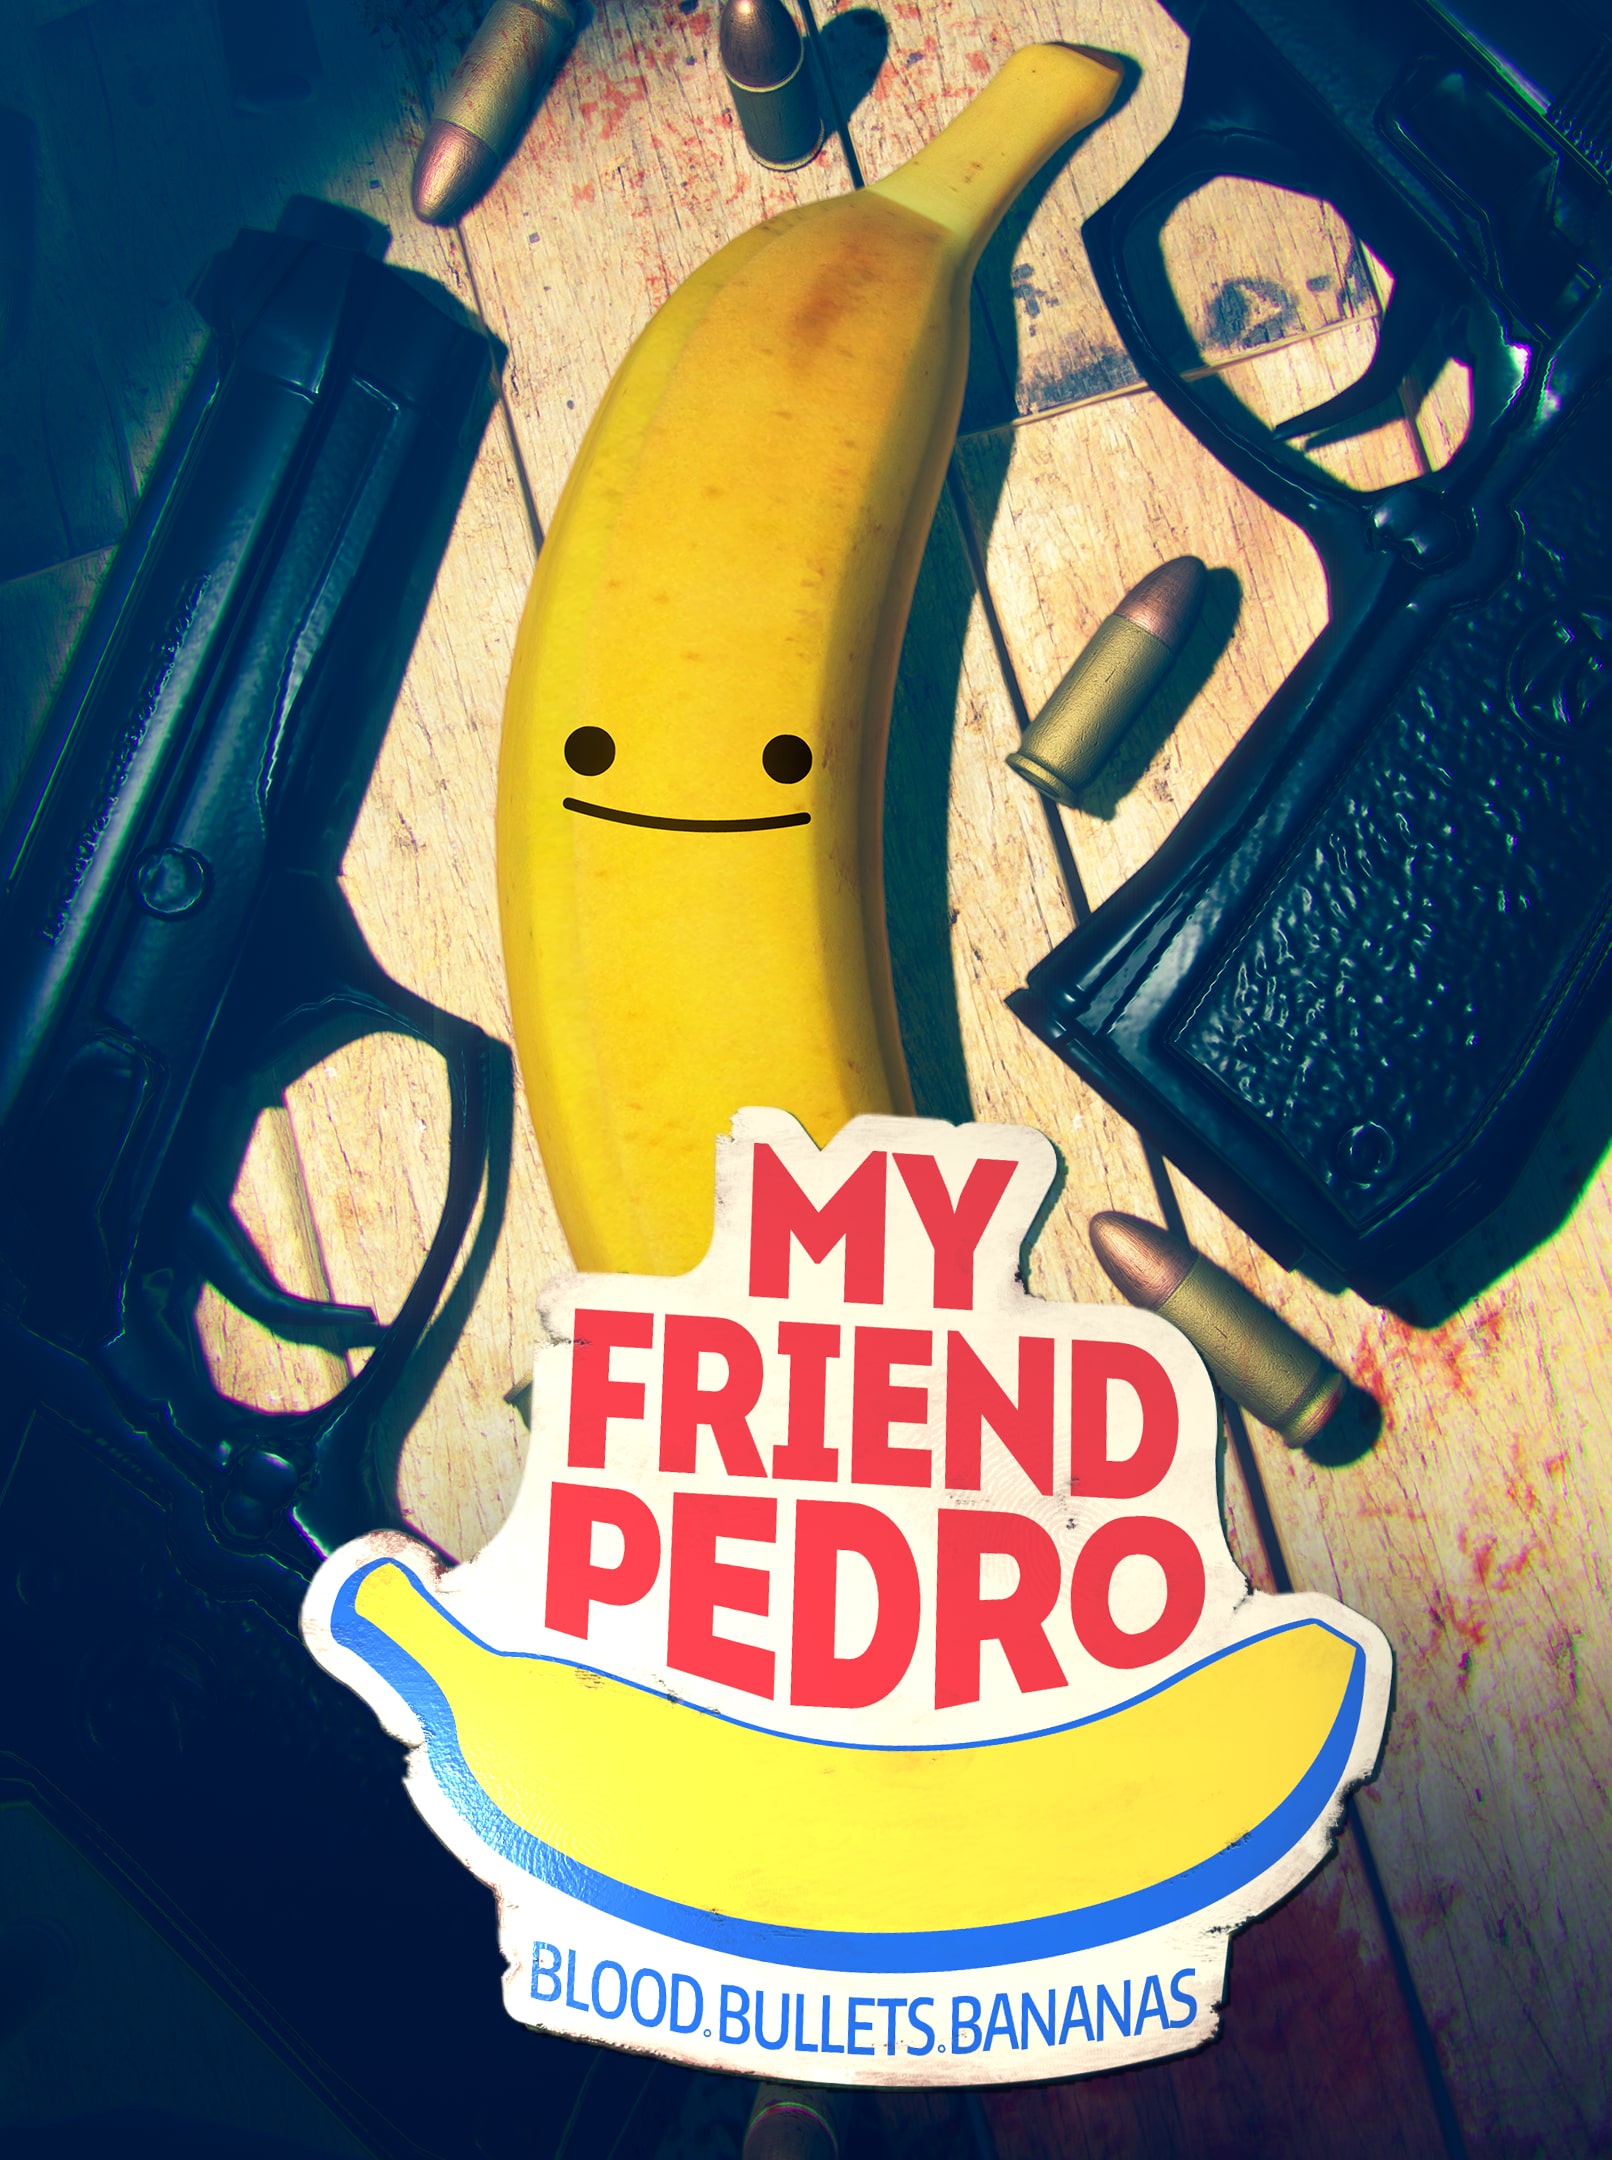 My Friend Pedro - Play on Armor Games